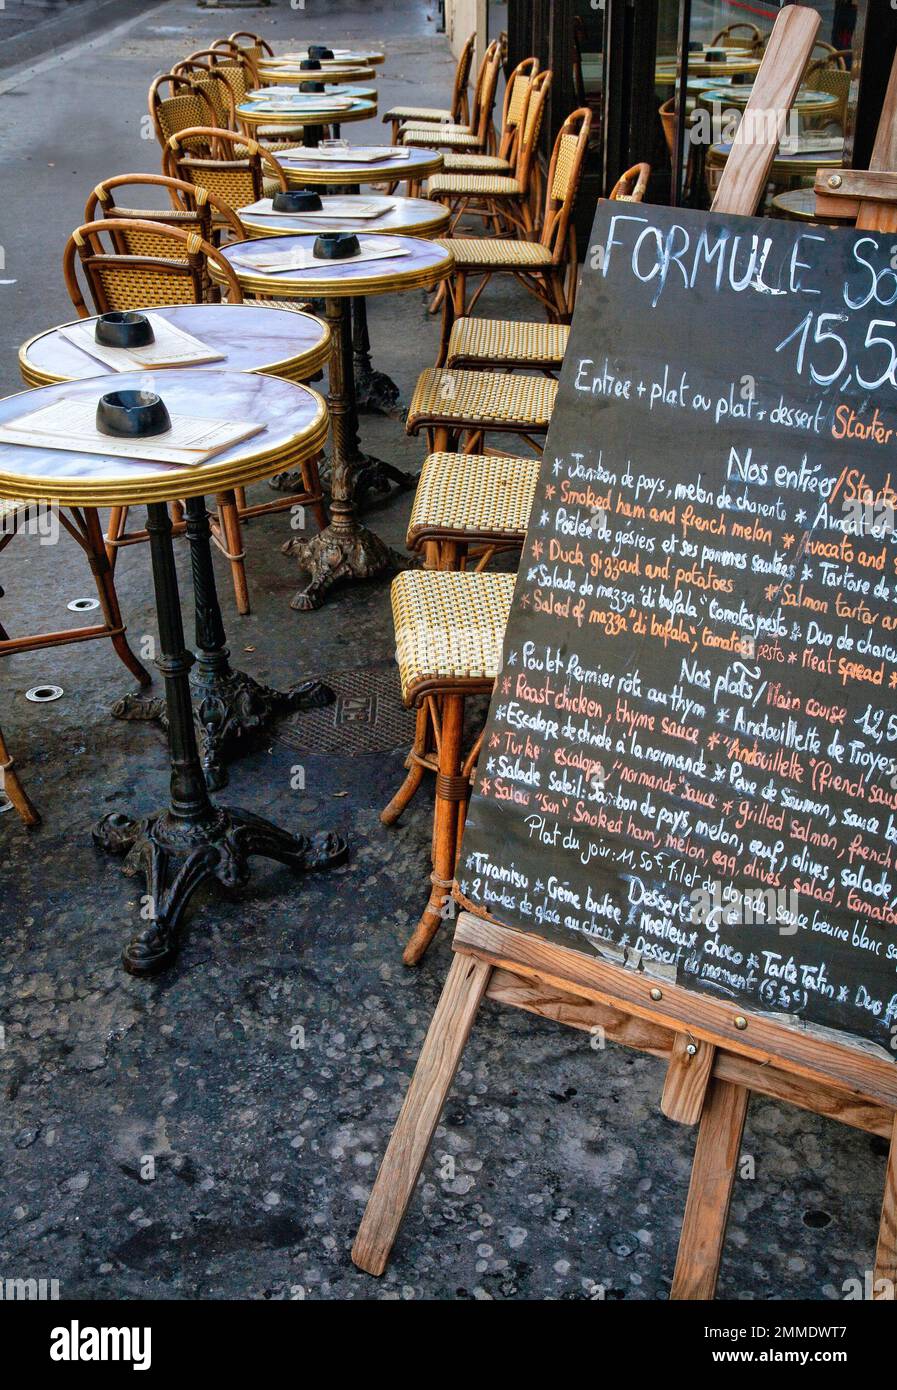 A sidewalk cafe on the streets of Paris, France. Stock Photo